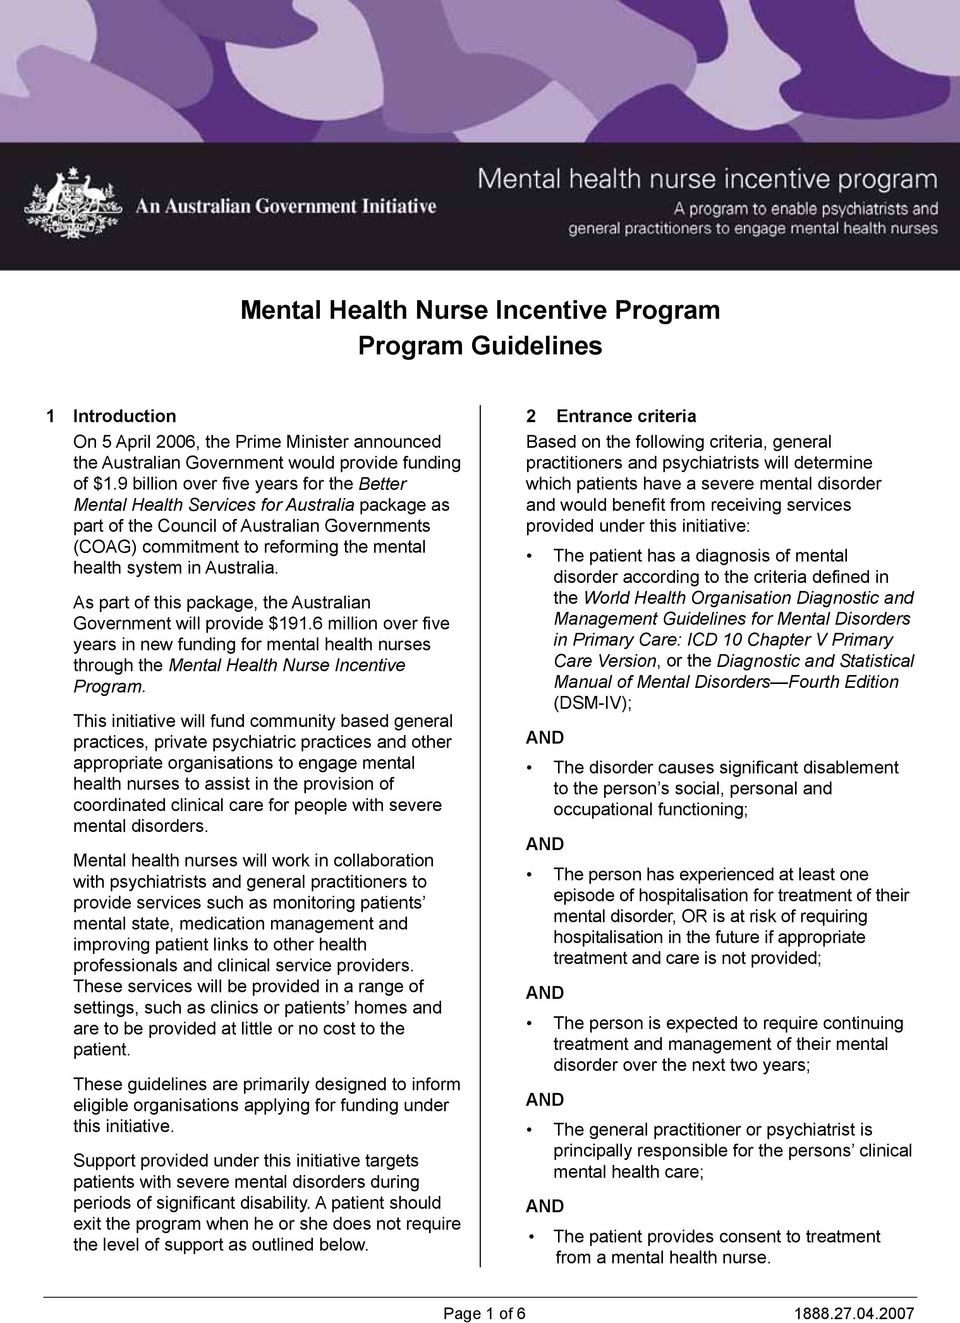 Australia. As part of this package, the Australian Government will provide $191.6 million over five years in new funding for mental health nurses through the Mental Health Nurse Incentive Program.